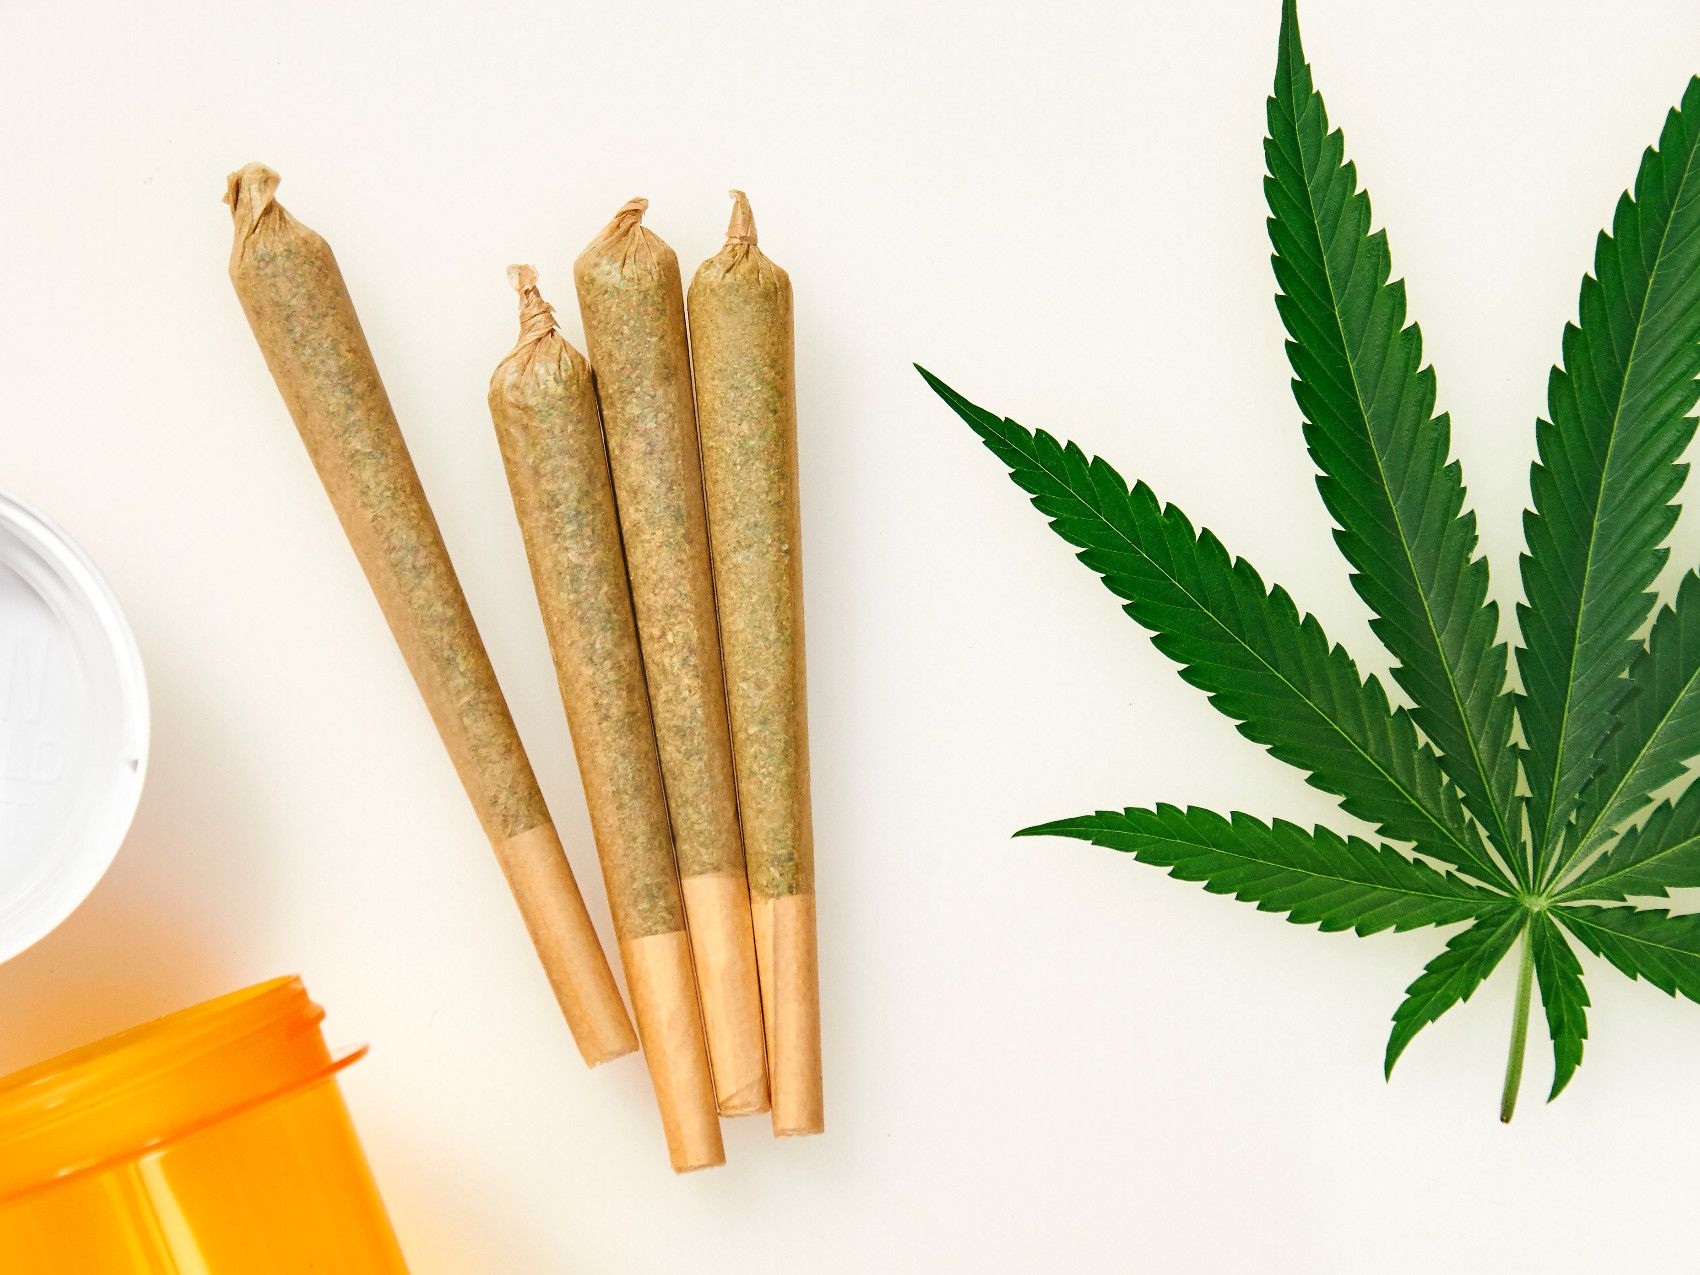  Exceeded limits were more common for wraps and cellulose papers than for rolling papers and cones. / Photo: Christopher Annis / iStock / Getty Images Plus